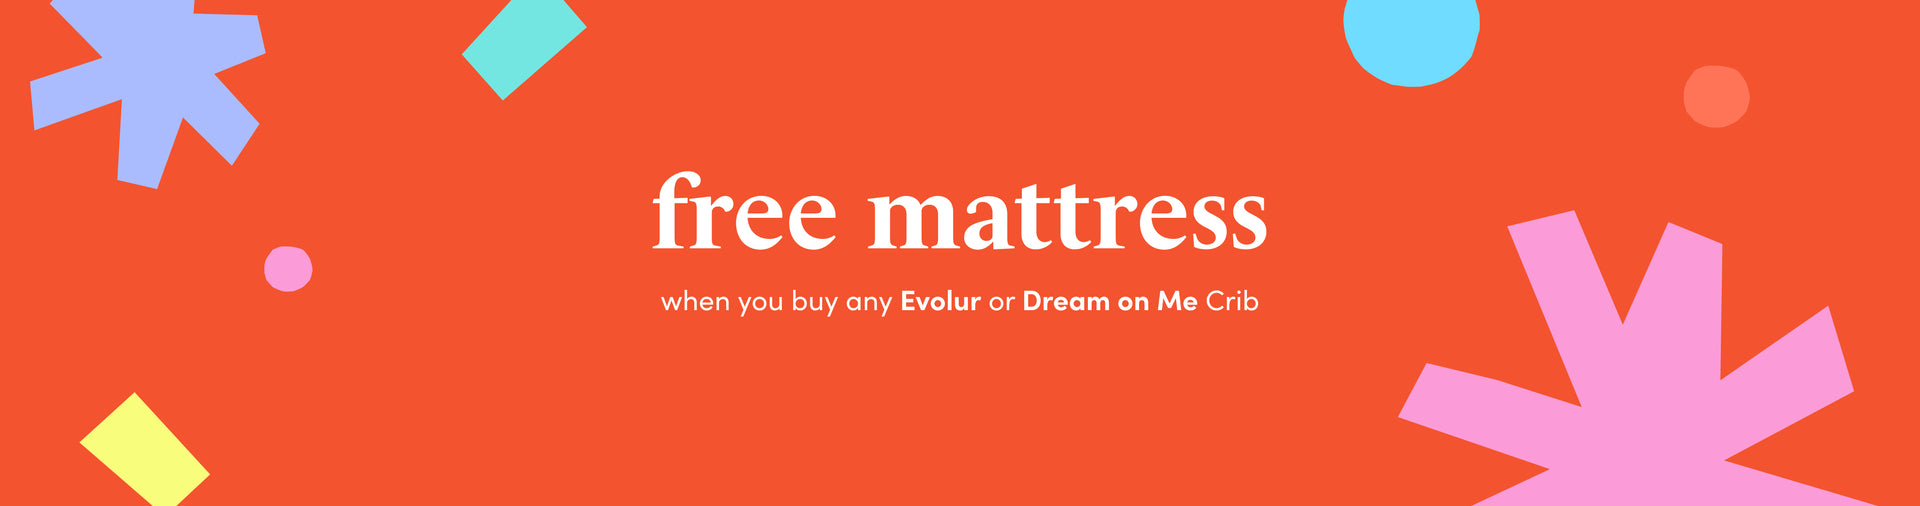 free matress when you buy any Evolur or Dream on Me Crib